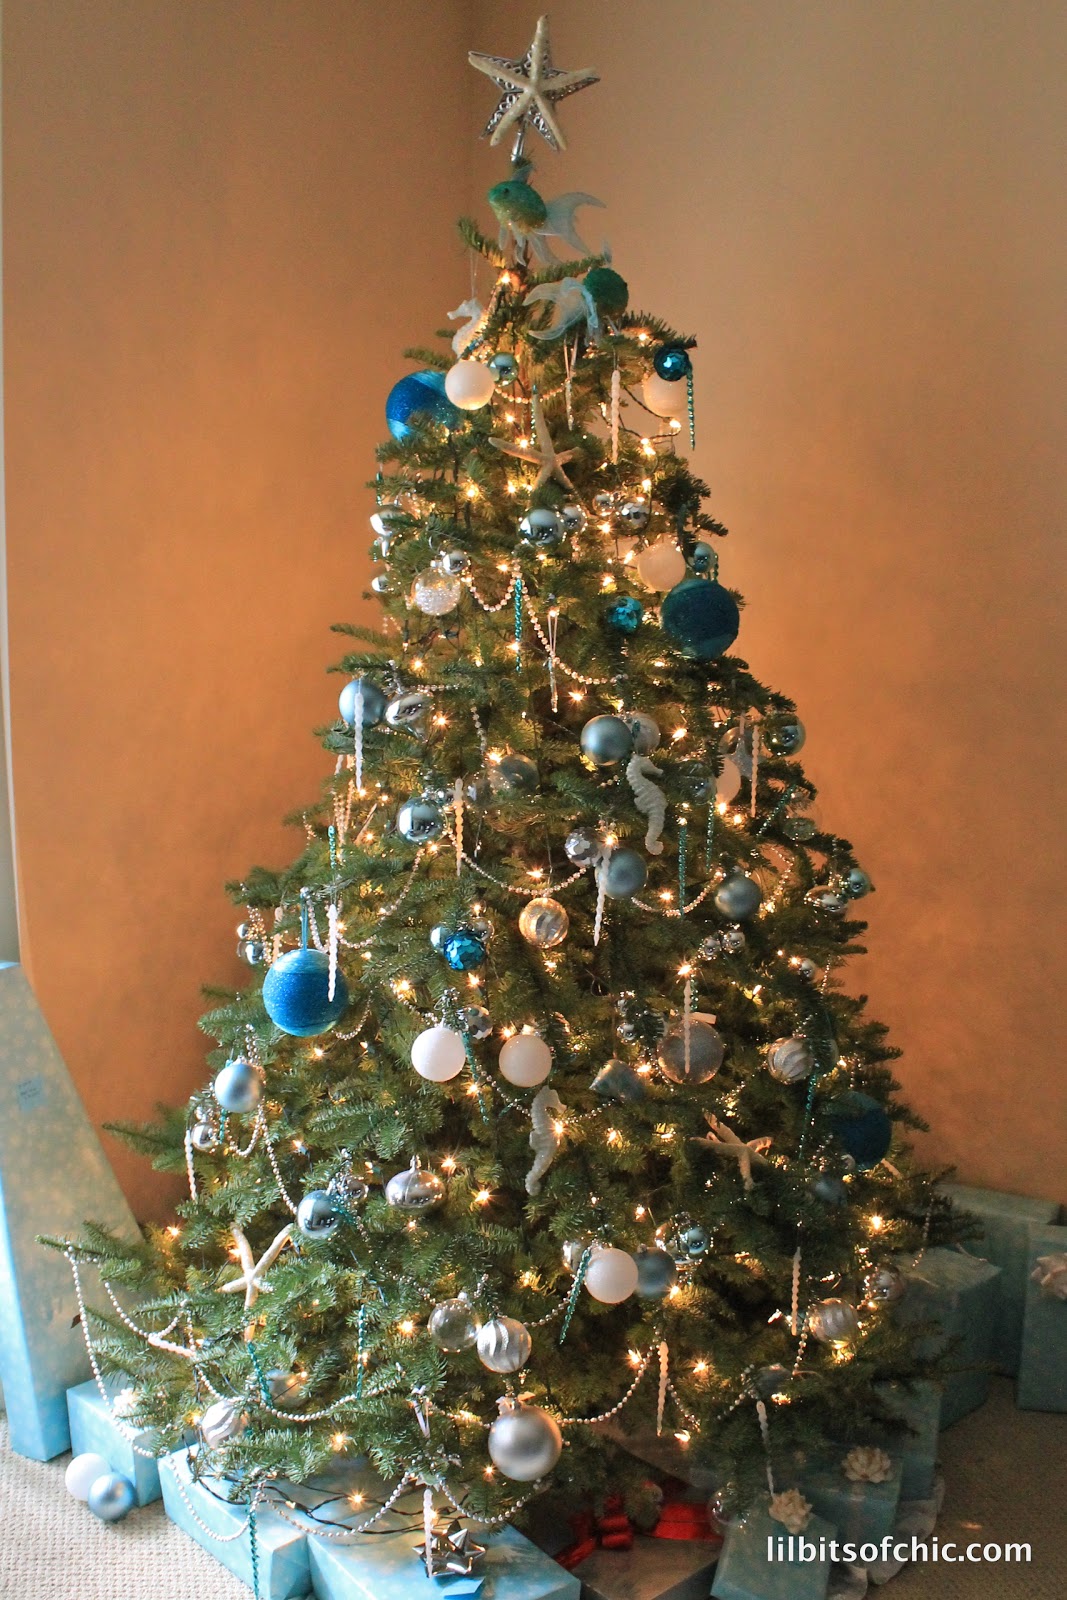 My Ocean Themed Christmas Tree - Lil bits of Chic